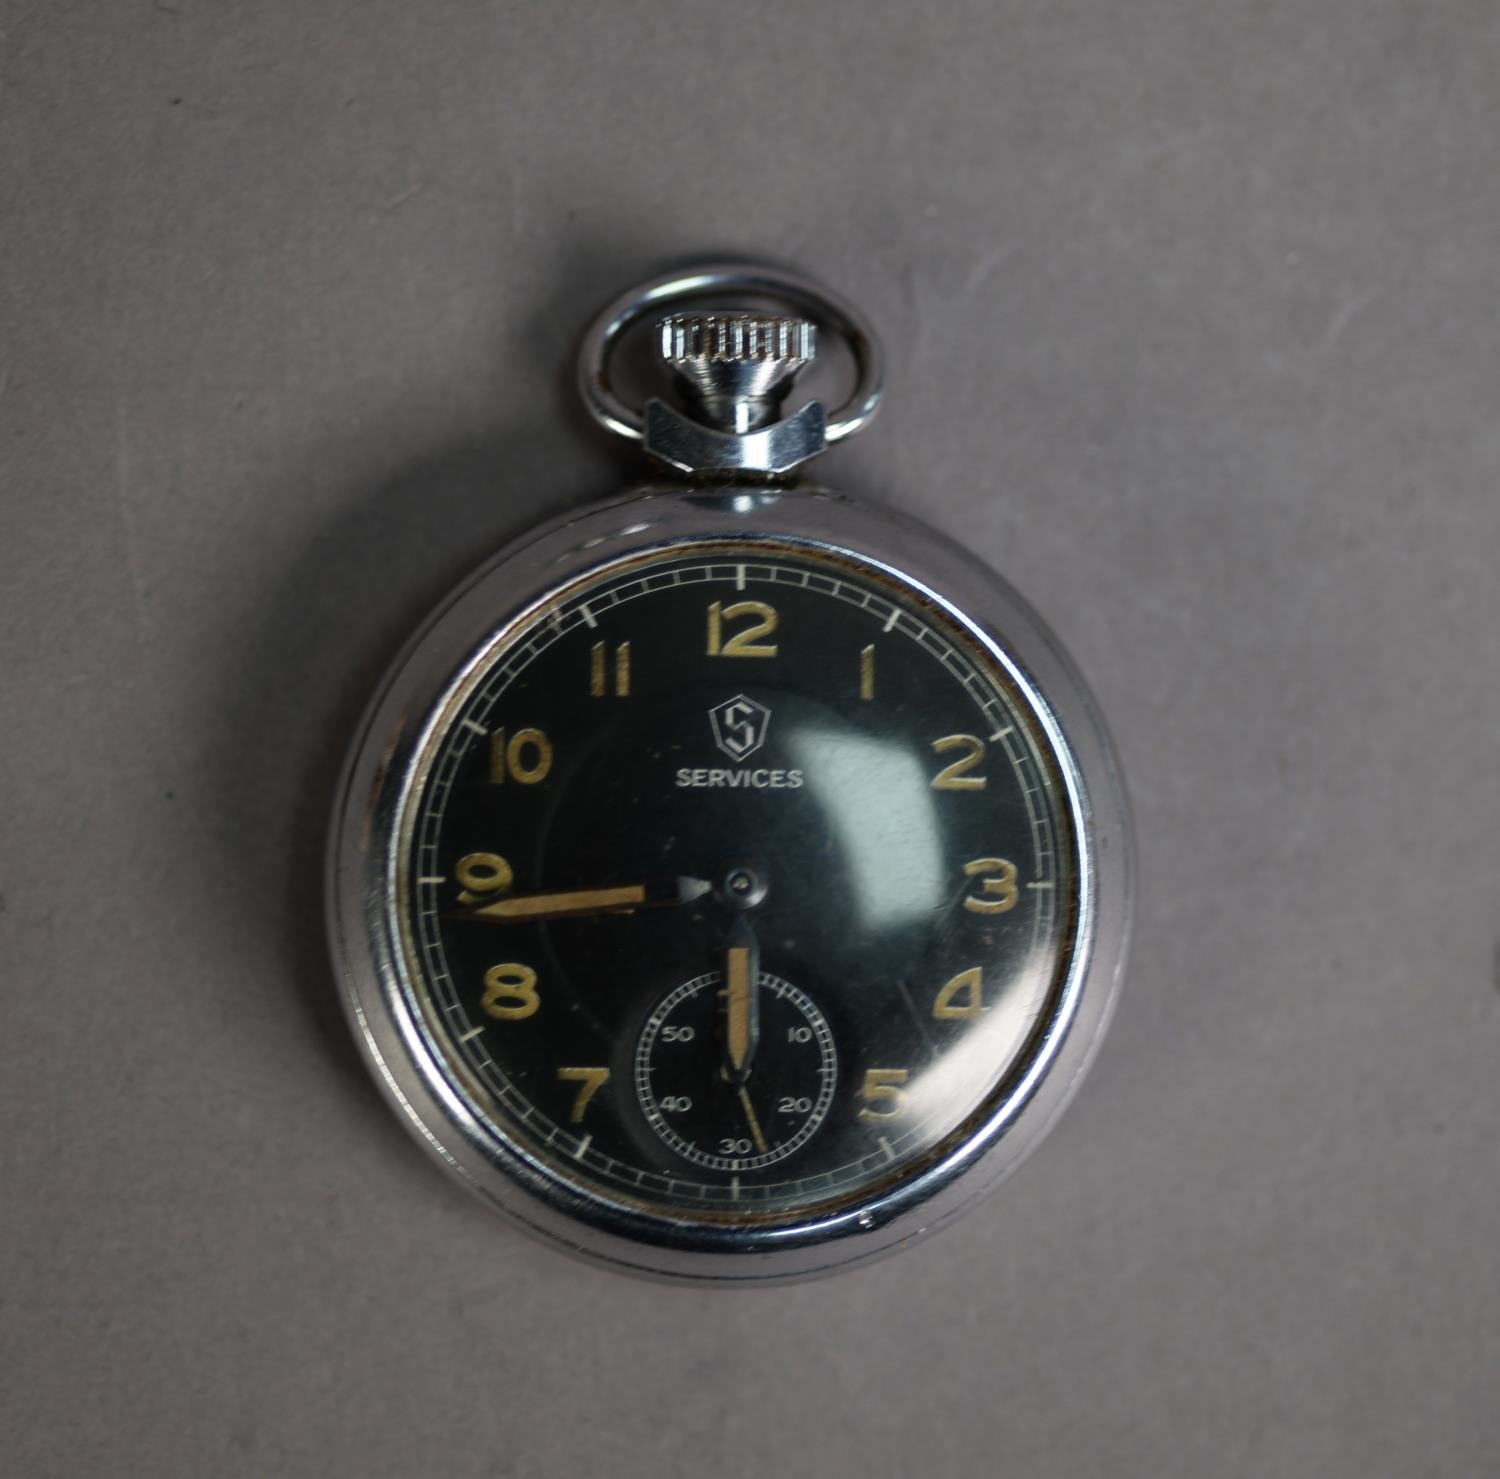 THREE STOP WATCHES WITH MECANICAL MOVEMENT and chromed metal cases, makers Servies, Ingersoll & - Image 3 of 7